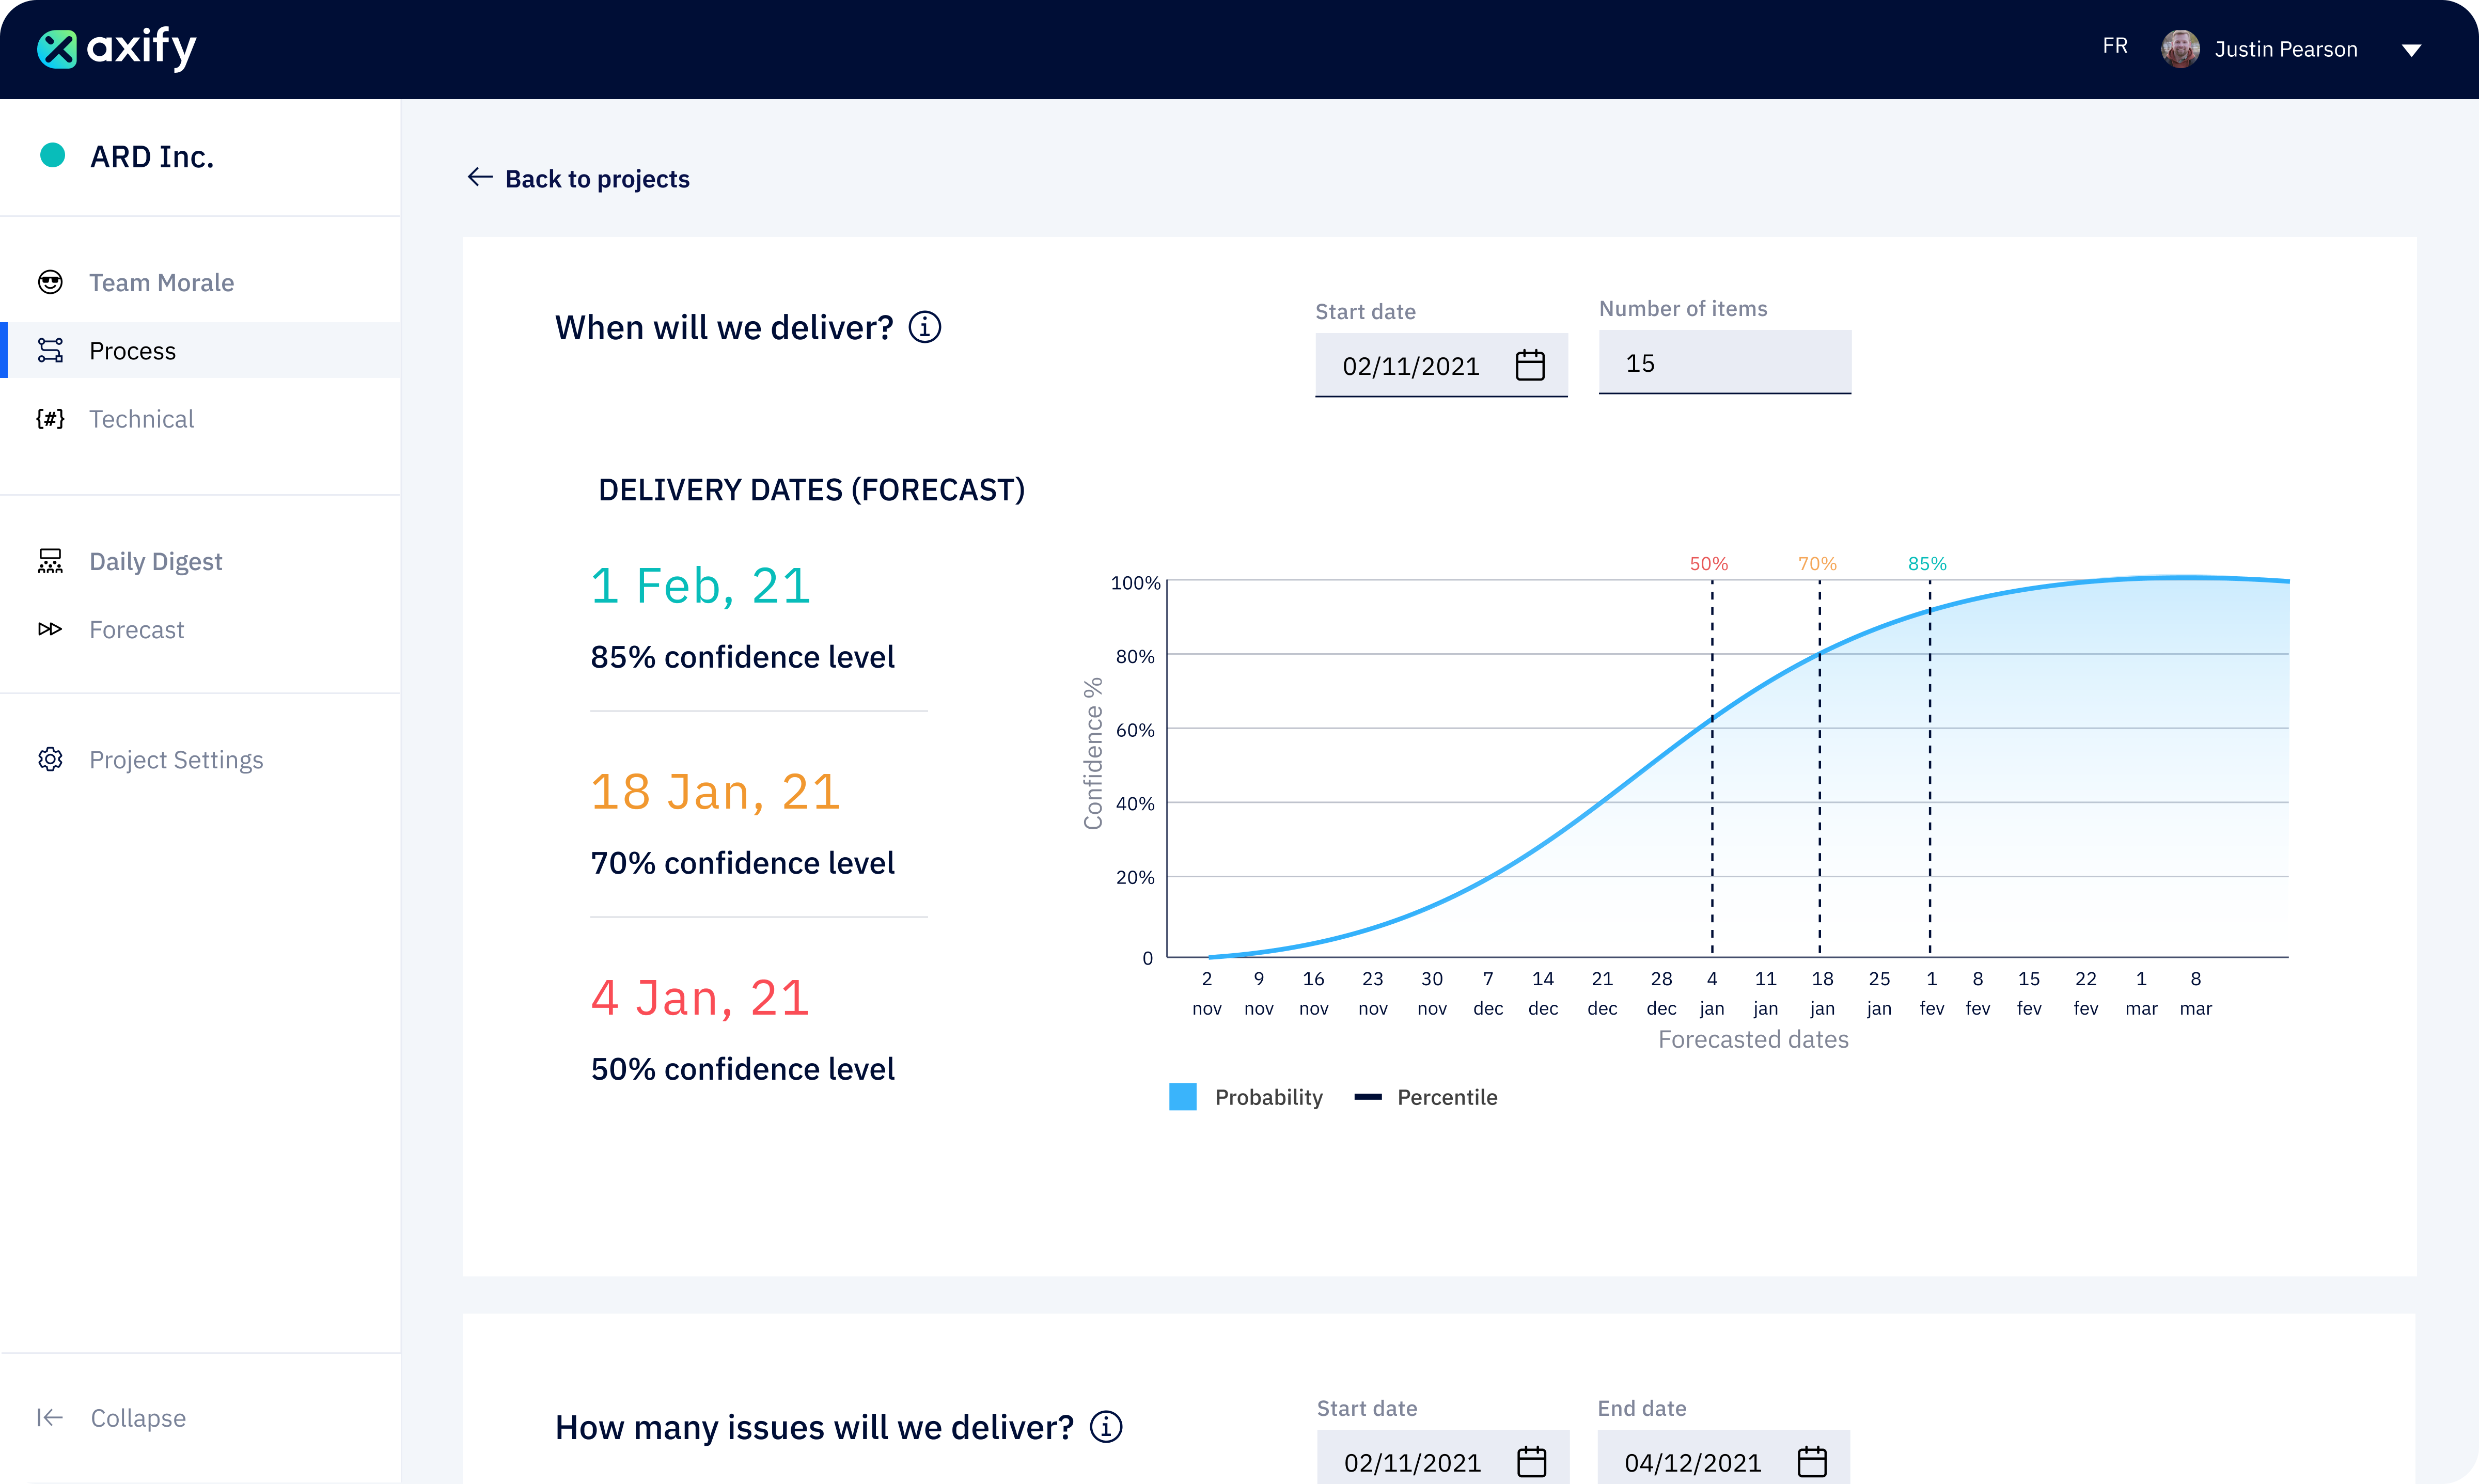 Our forecasting tool relies on multiple simulations based on the team's historical data to either predict how many items your team can deliver over a period of time or when you will deliver a set number of items. And in real-time! Pretty cool, right?